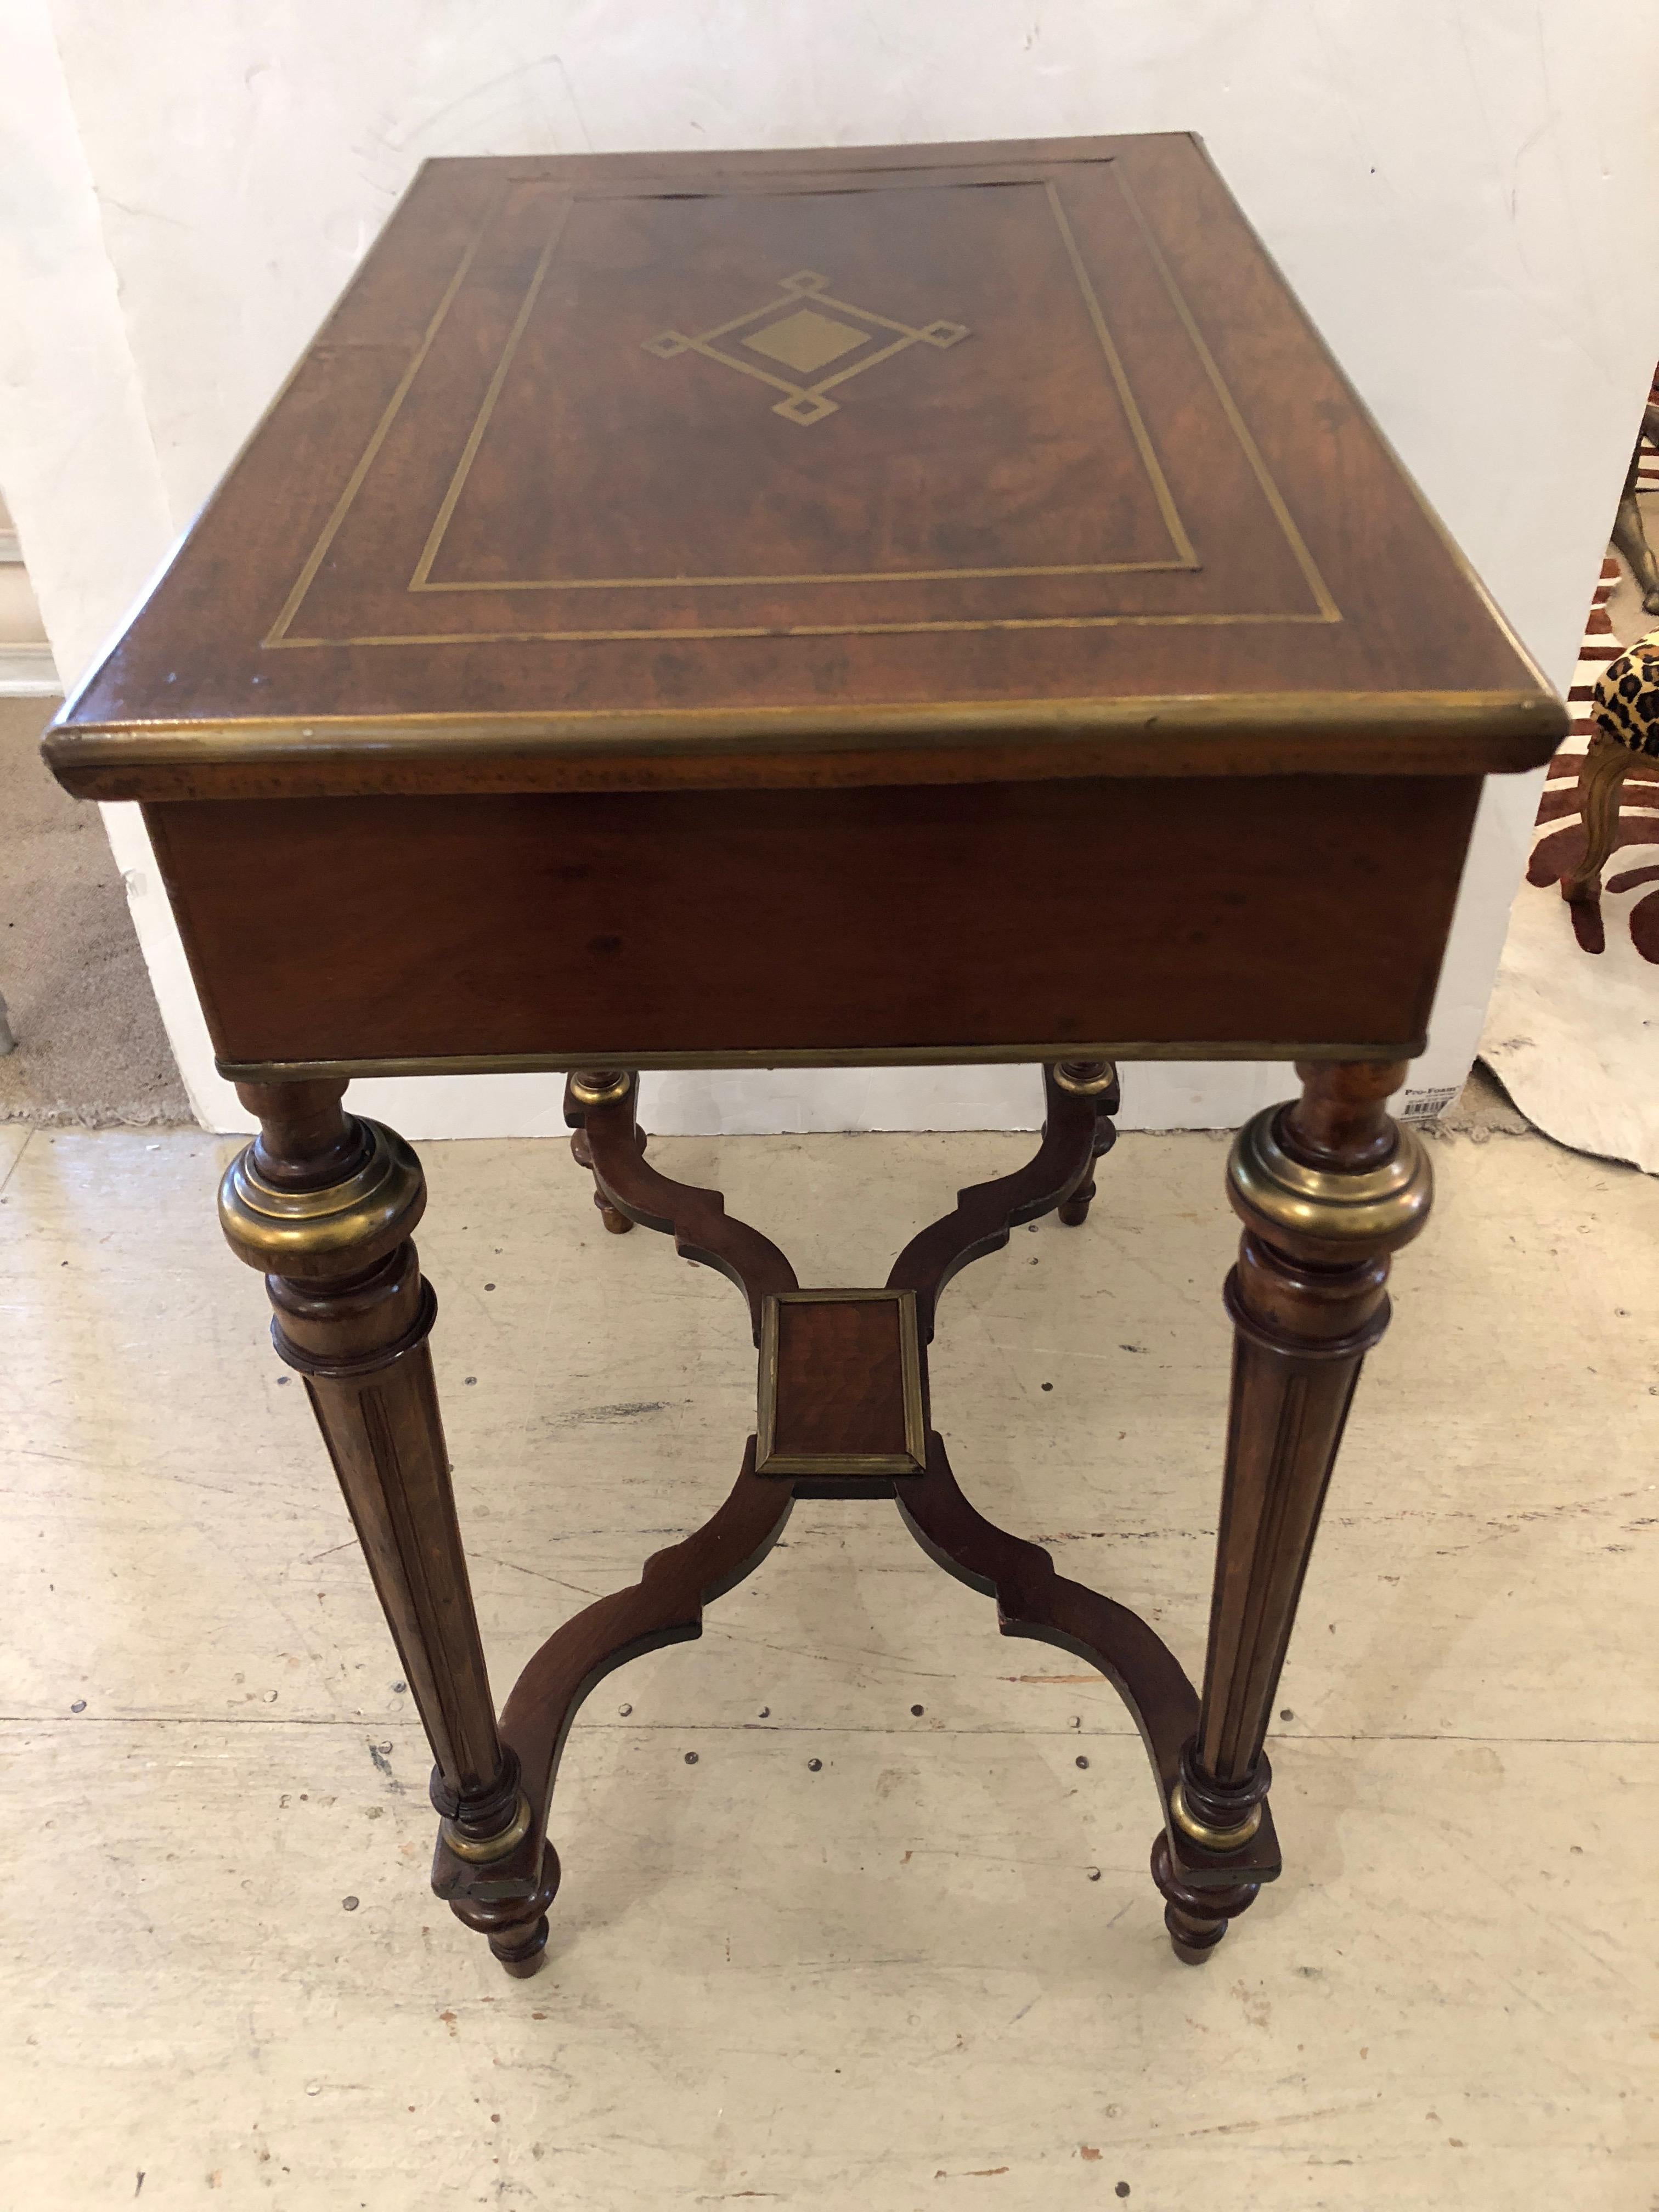 19th Century Mahogany and Brass Inlaid Side Table with Interior Compartments For Sale 5